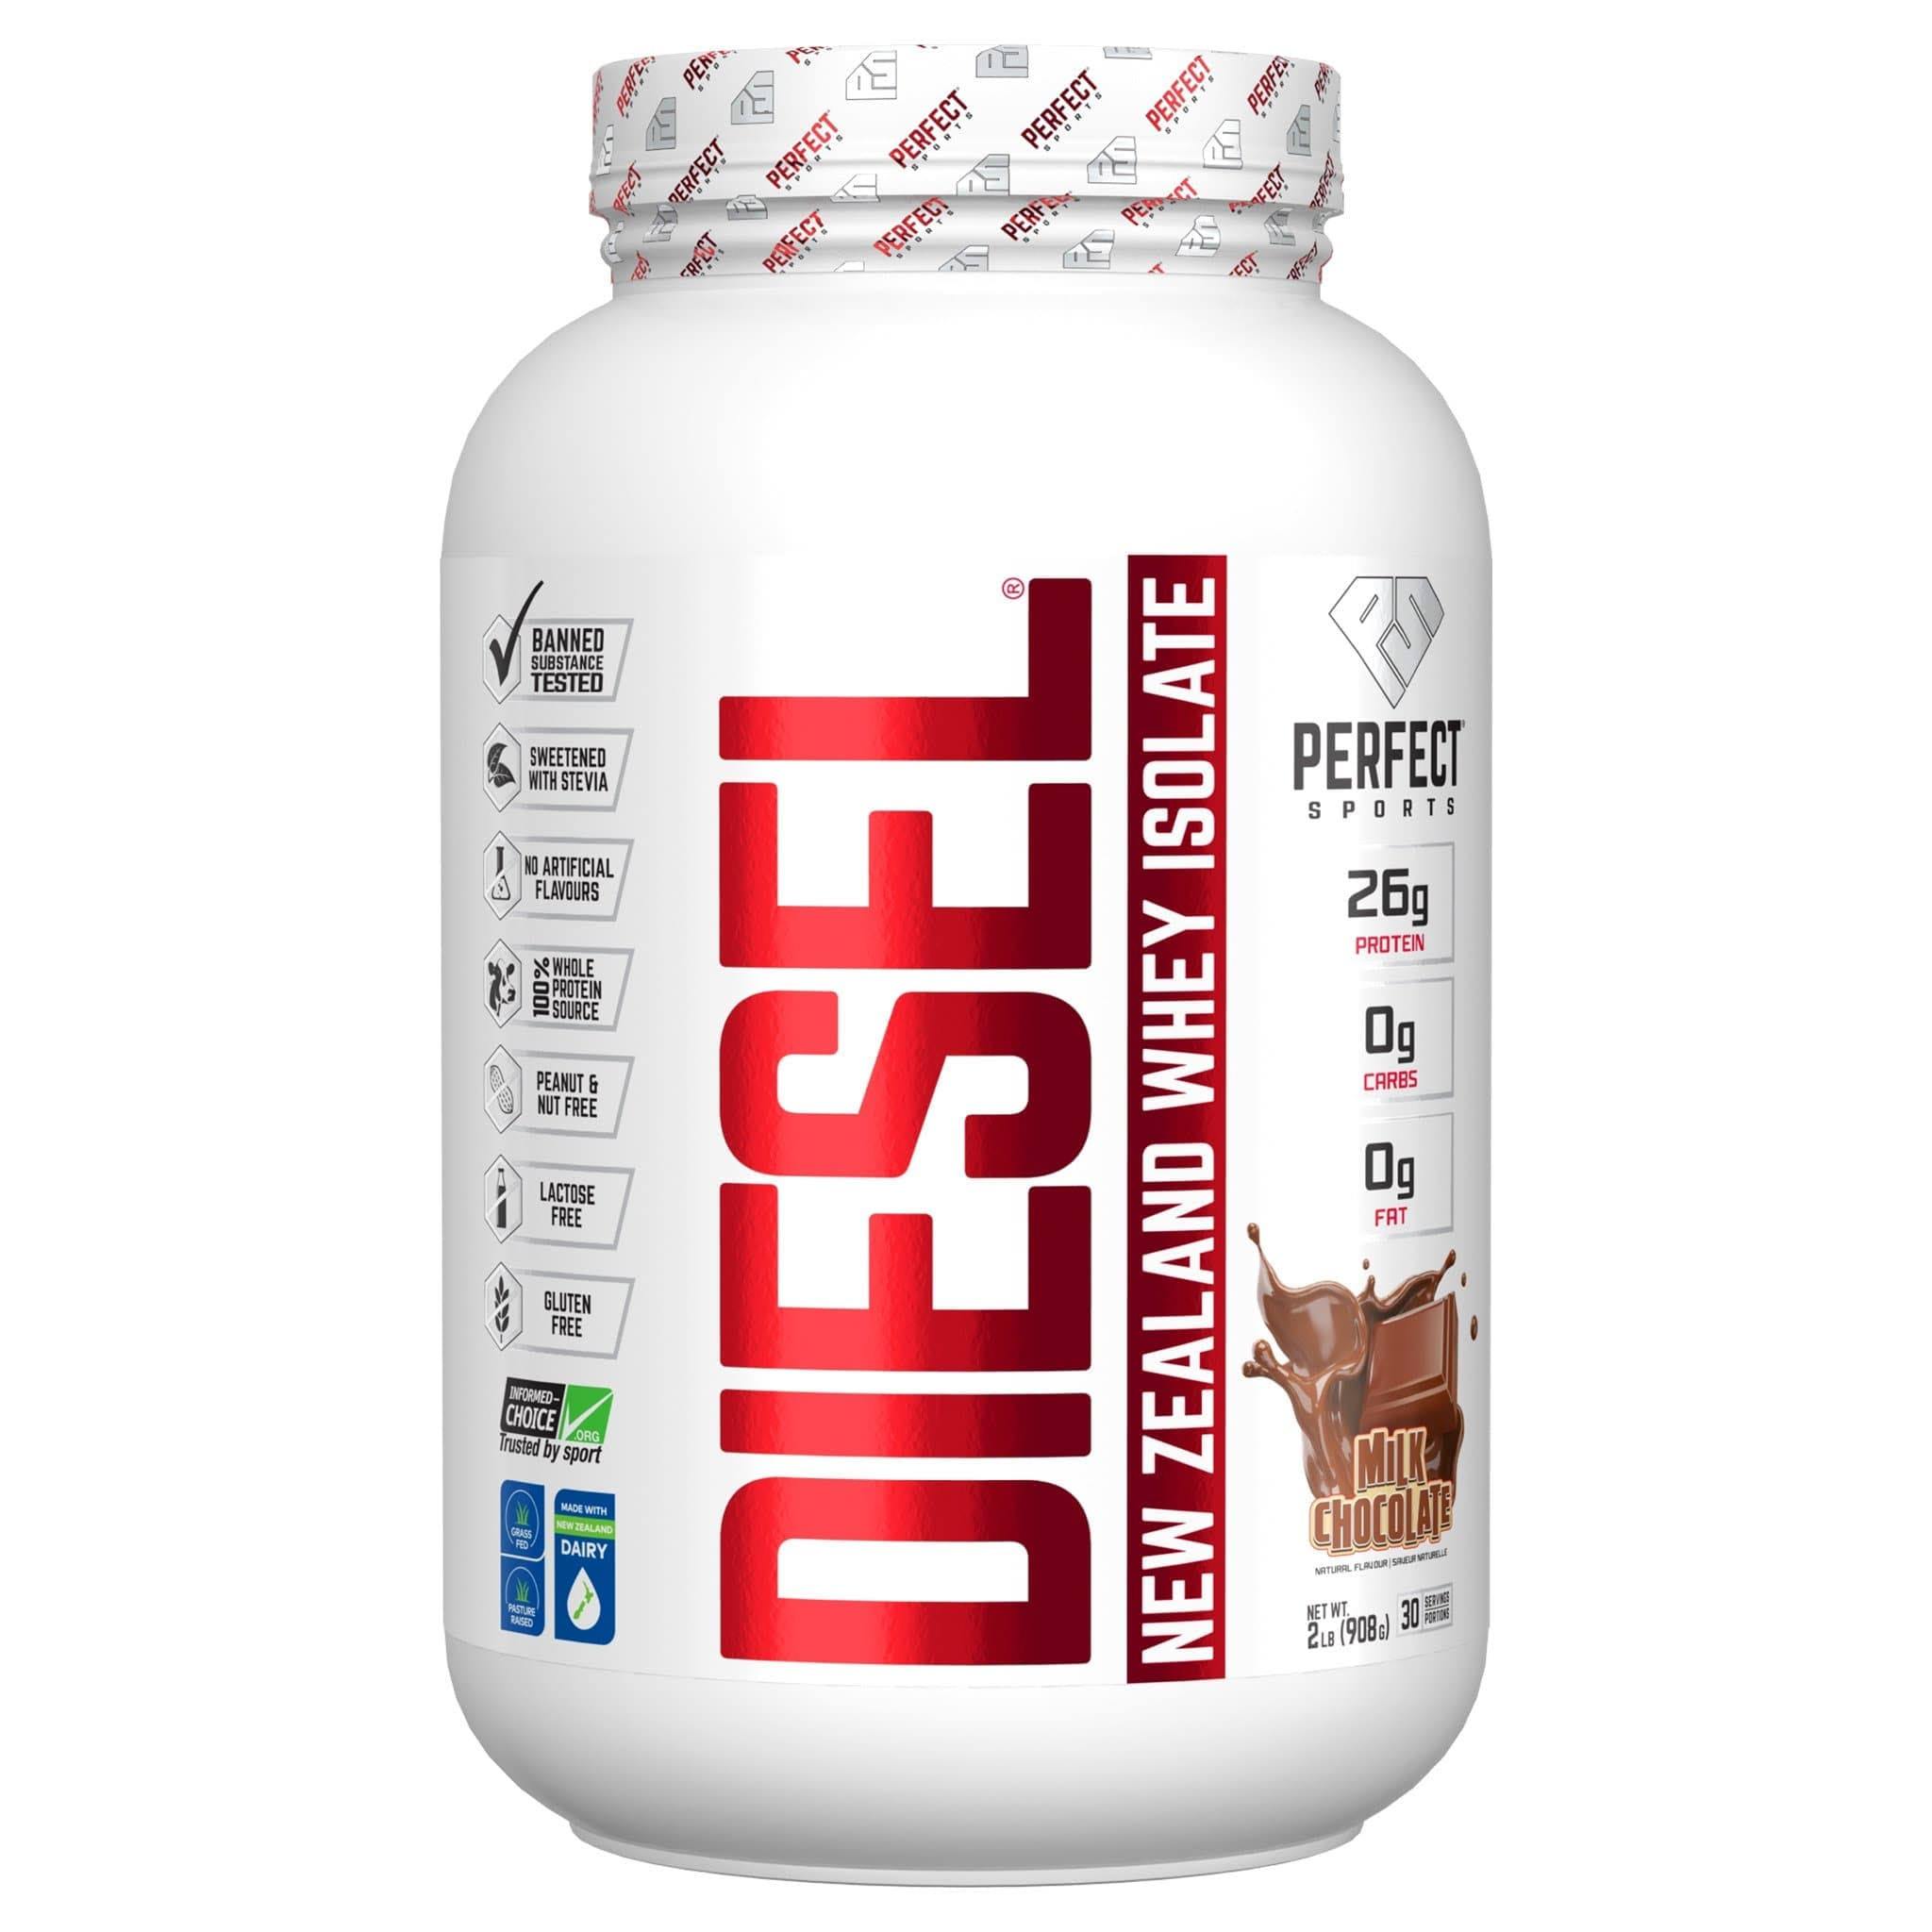 Perfect Sports DIESEL New Zealand Whey Isolate, Chocolate Mint / 2lb